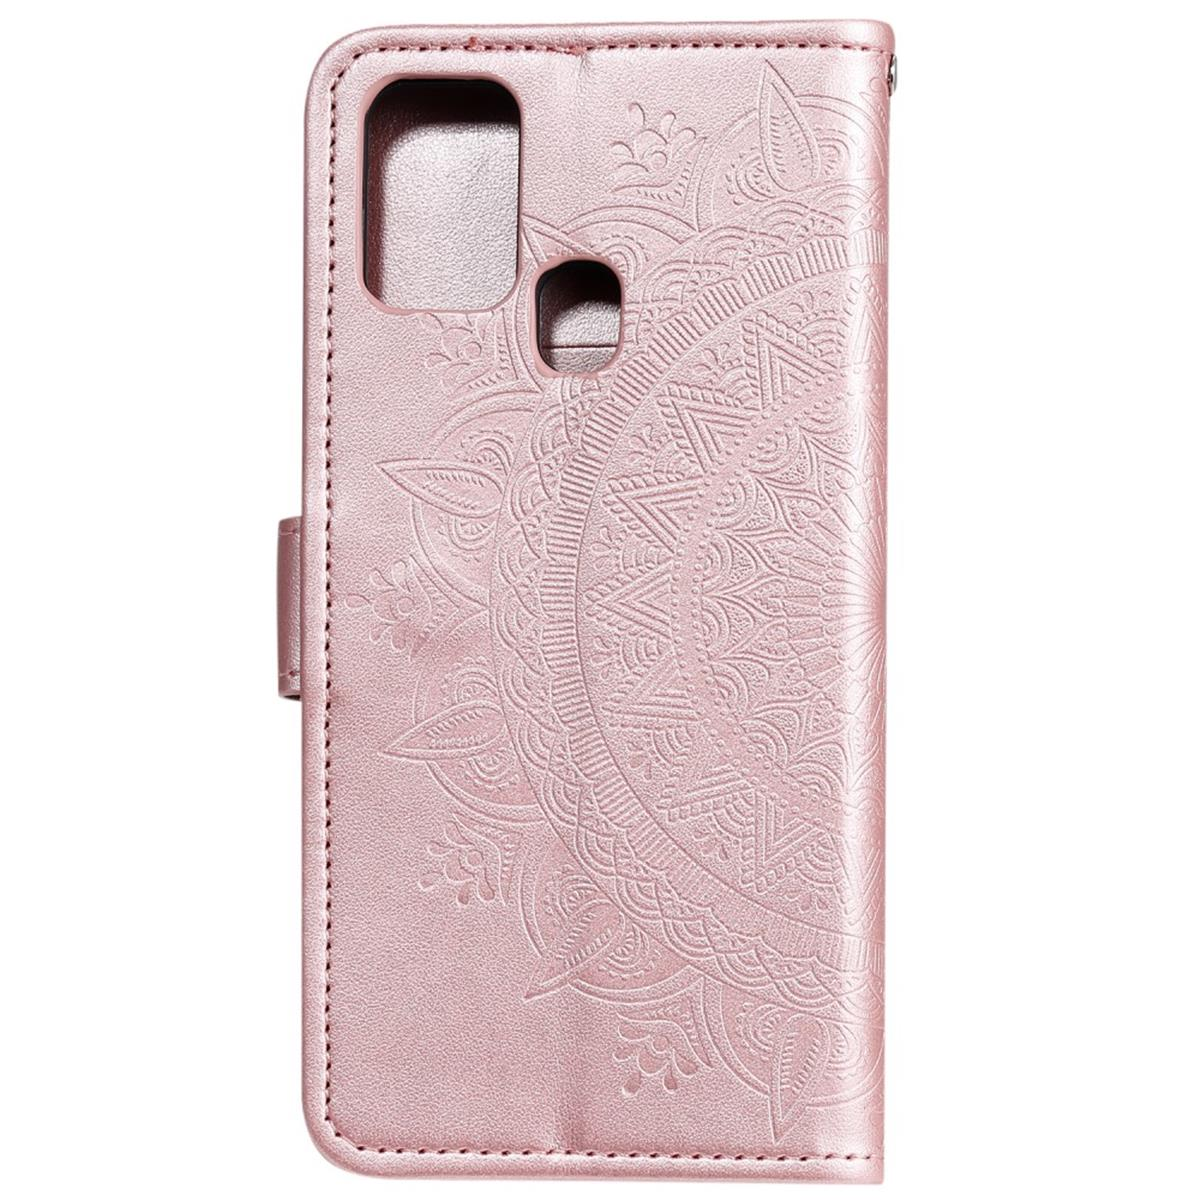 Samsung, Roségold COVERKINGZ A21s, Bookcover, mit Mandala Muster, Galaxy Klapphülle